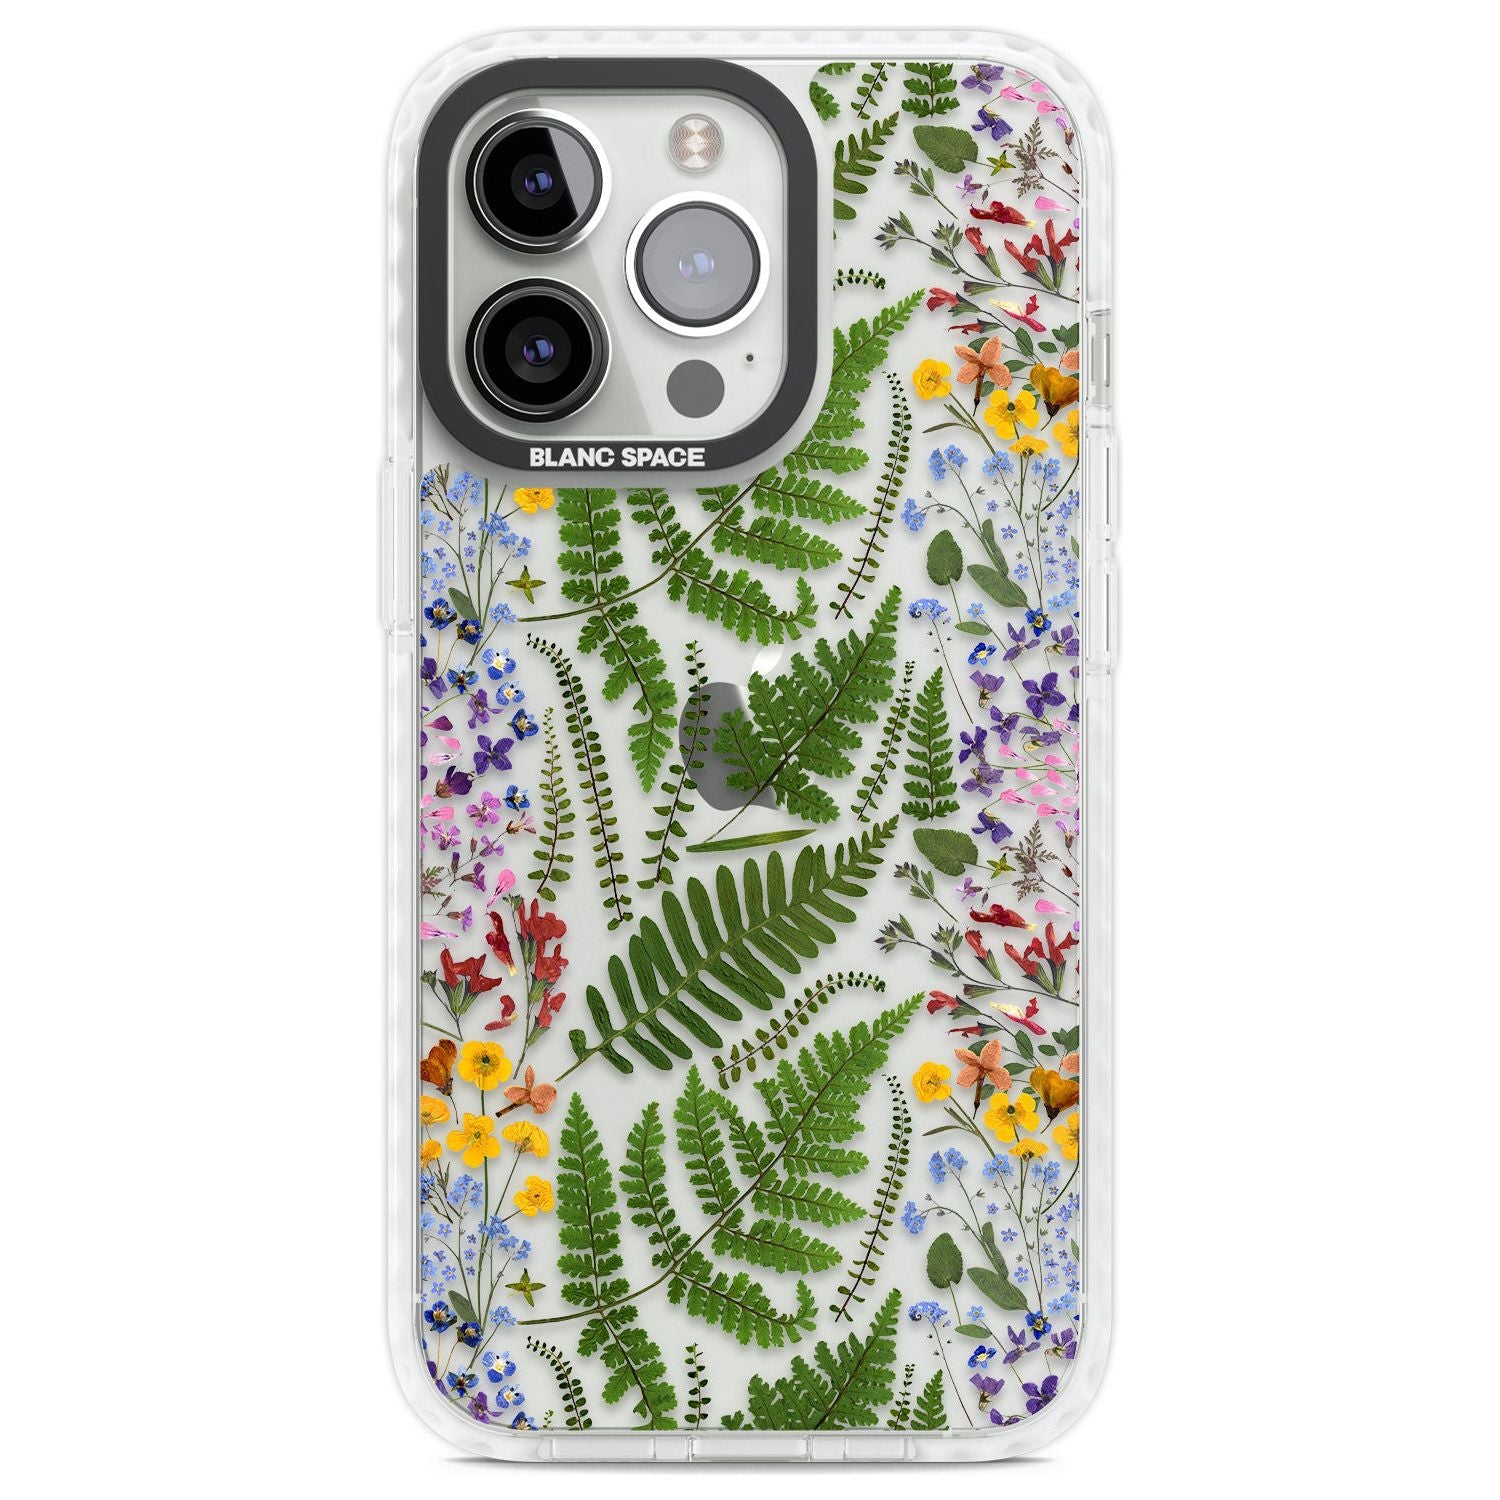 Busy Floral and Fern Design Phone Case iPhone 13 Pro / Impact Case,iPhone 14 Pro / Impact Case,iPhone 15 Pro Max / Impact Case,iPhone 15 Pro / Impact Case Blanc Space